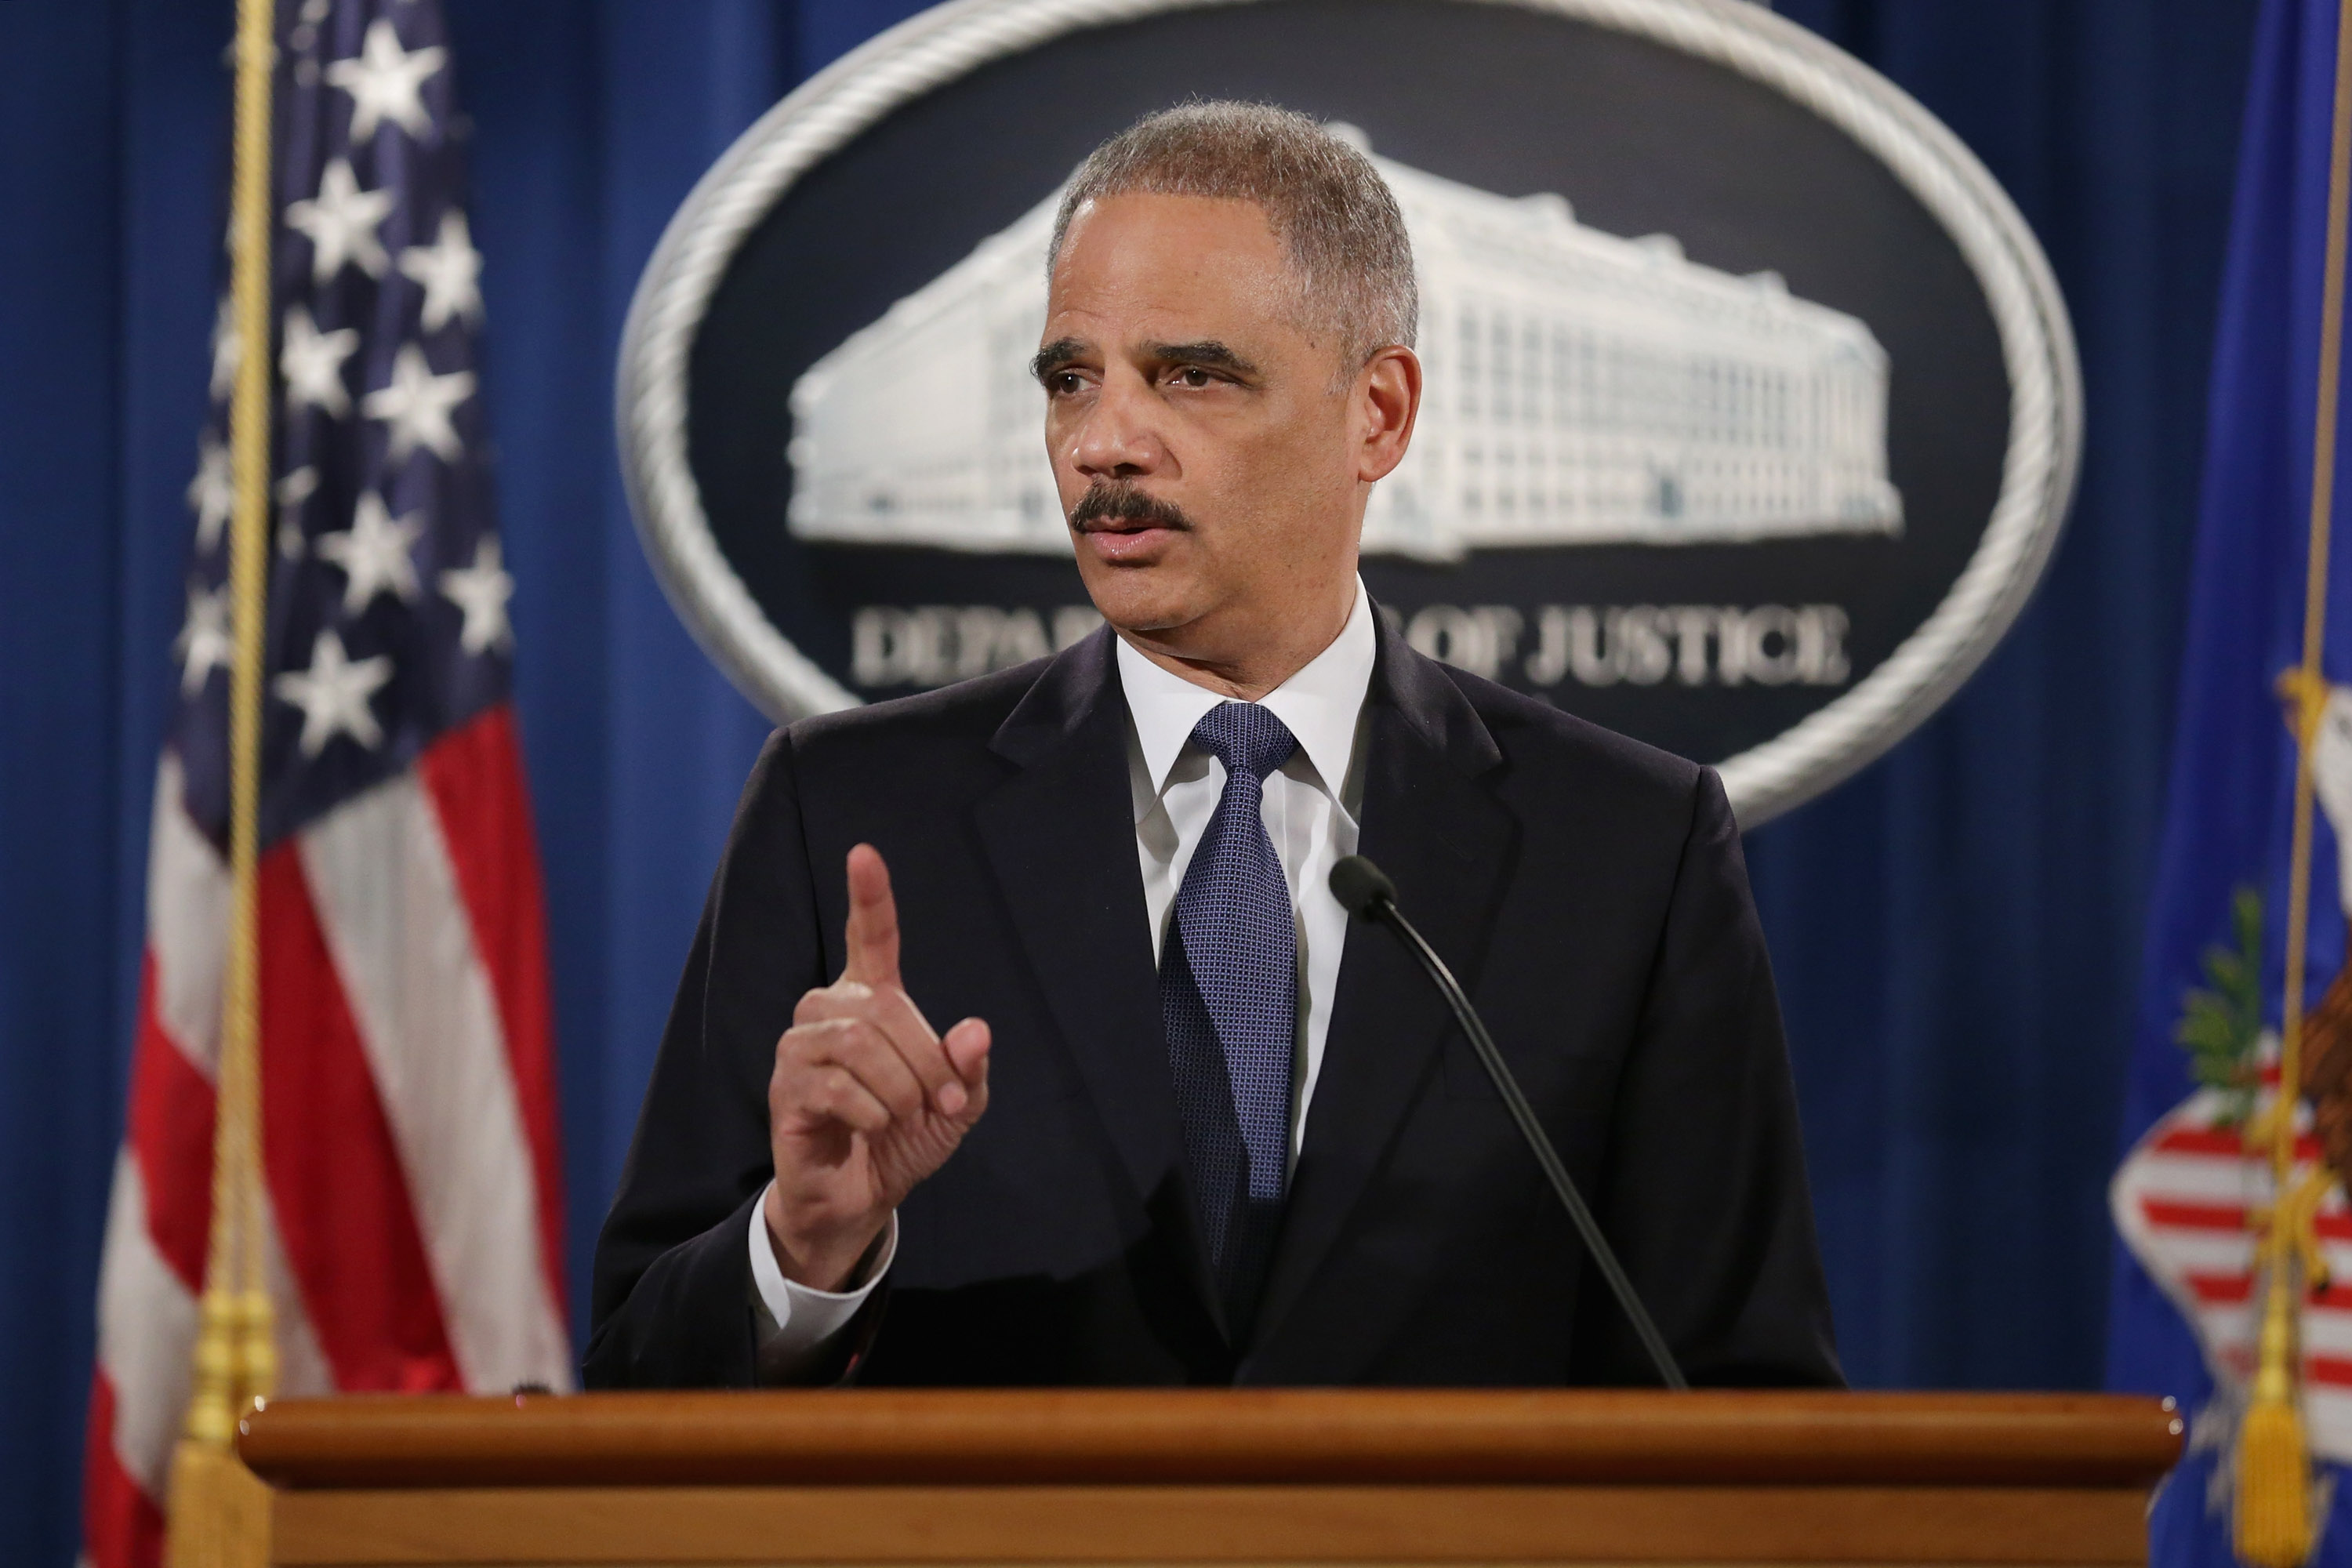 Attorney General Eric Holder delivers remarks about the Justice Department's findings related to two investigations in Ferguson, Missouri, at the Robert F. Kennedy Department of Justice Building March 4, 2015 in Washington, DC. (Chip Somodevilla&mdash;2015 Getty Images)